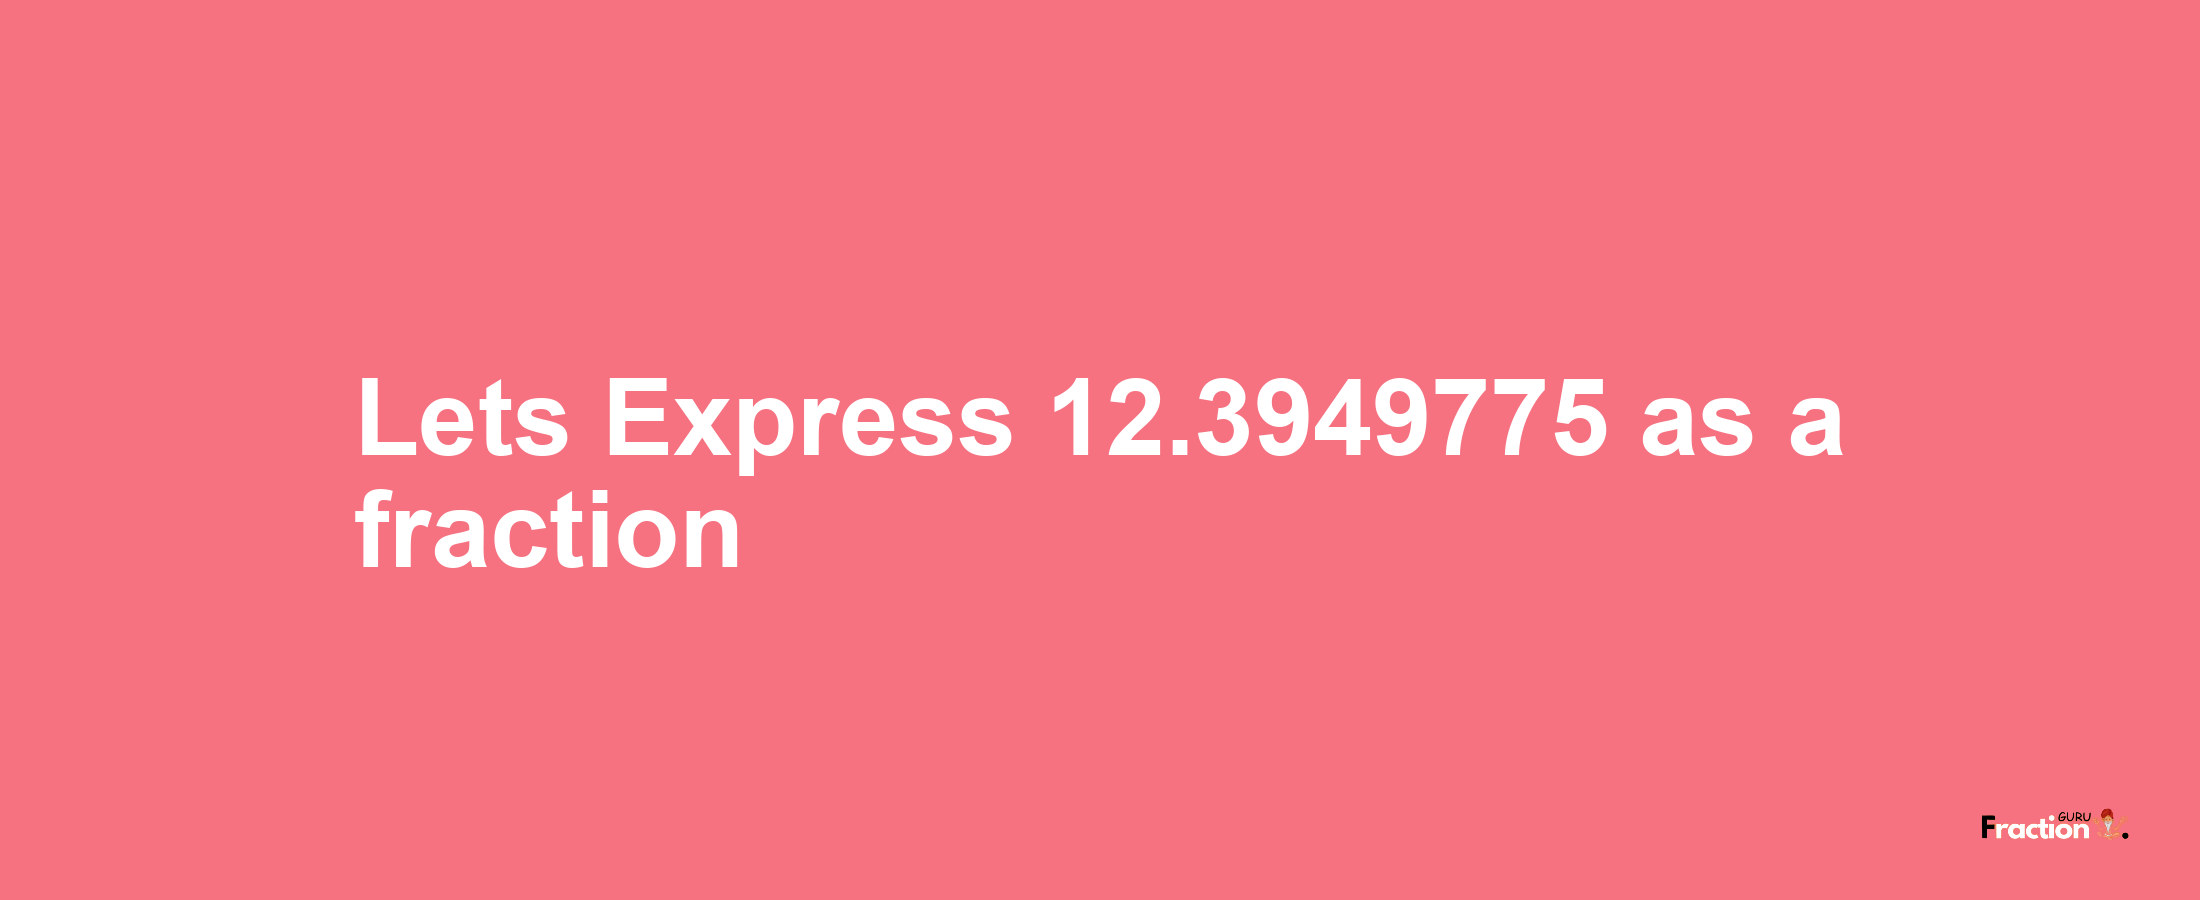 Lets Express 12.3949775 as afraction